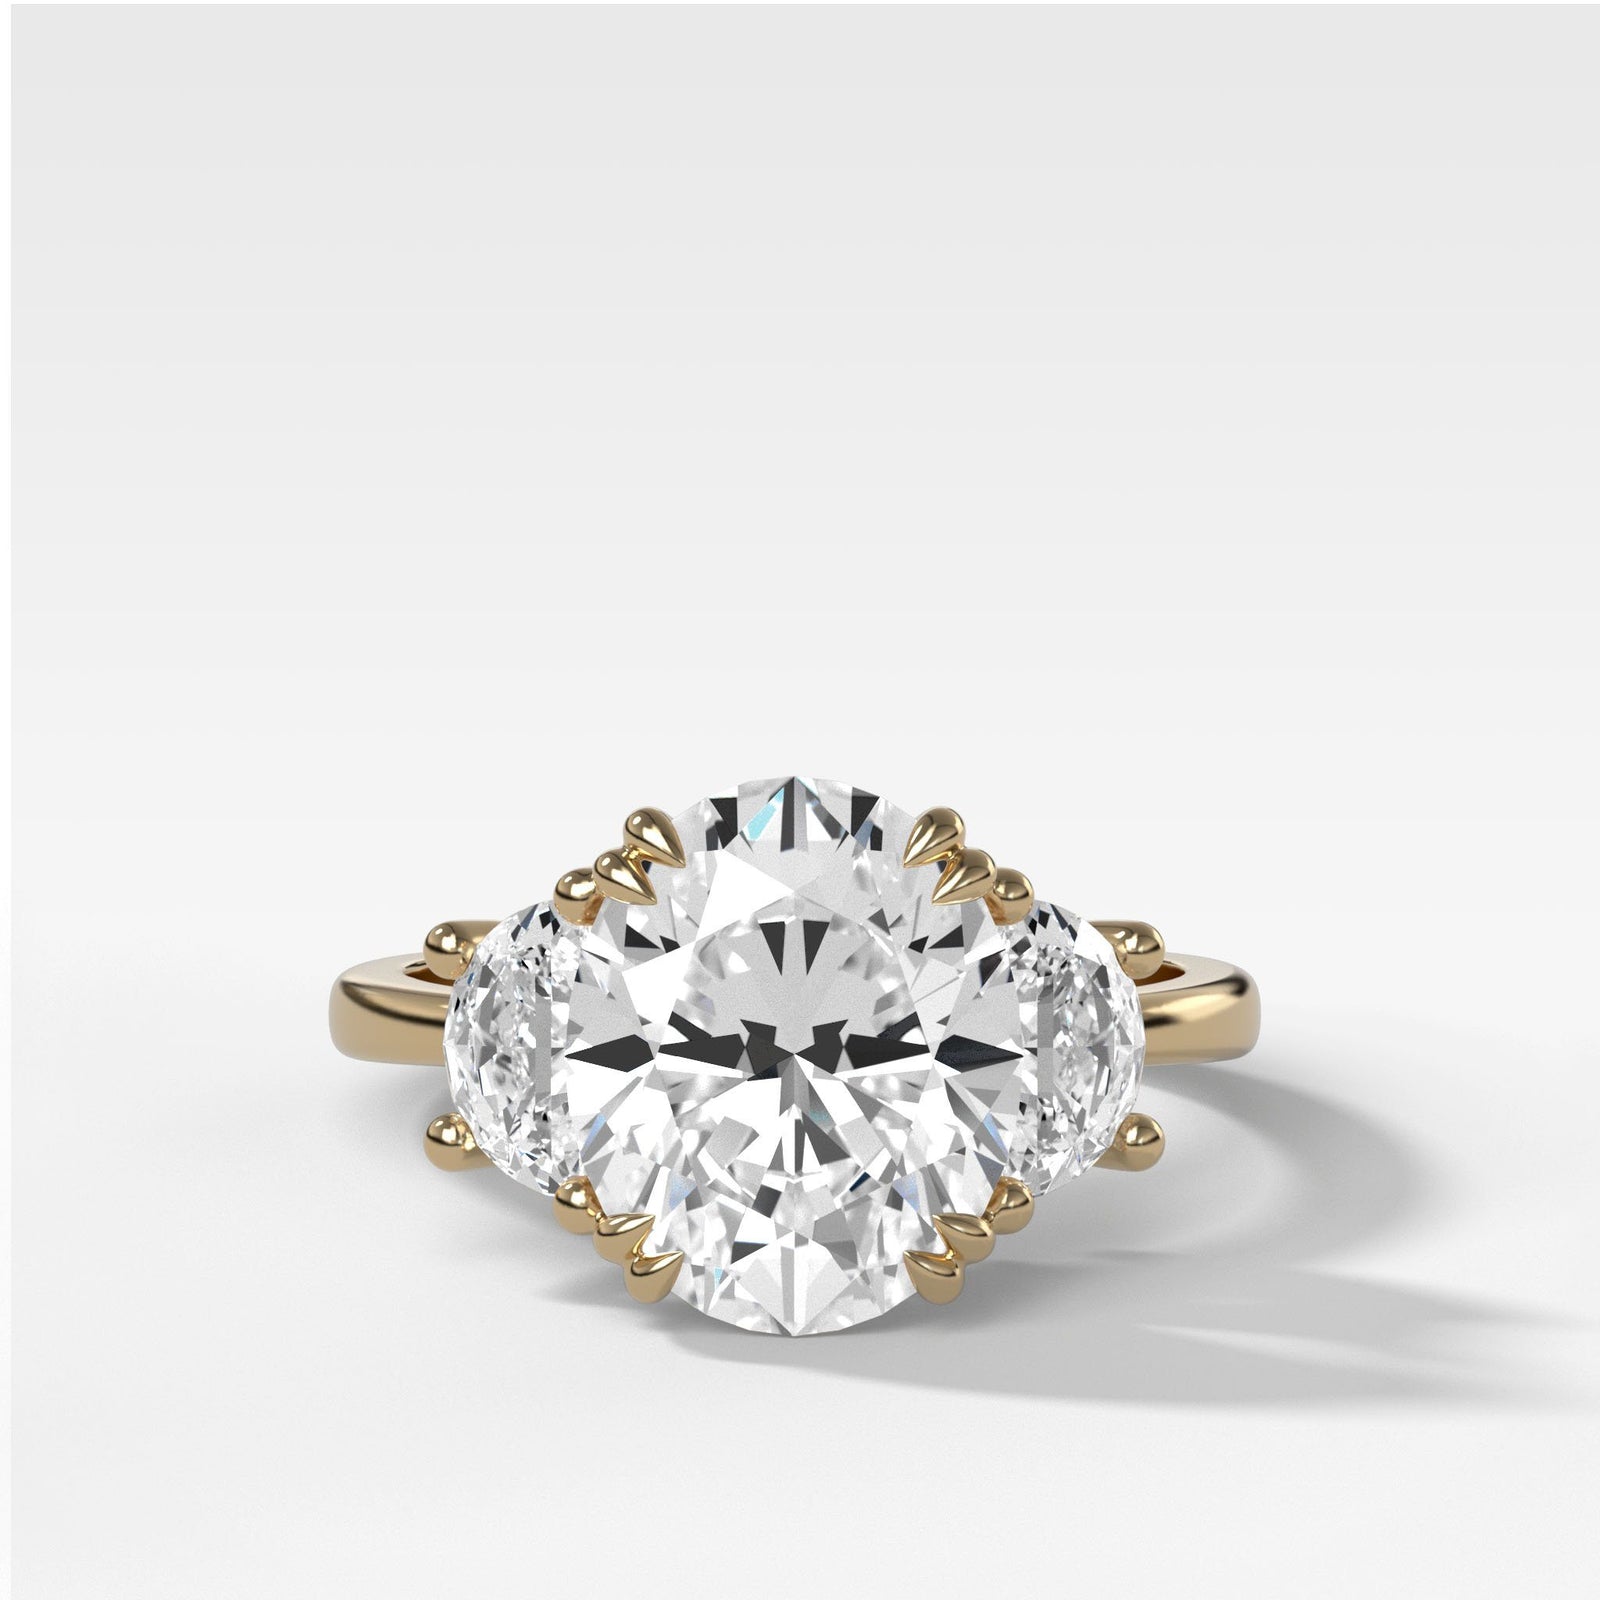 Buy Tri-Diamond Rings, Made with BIS Hallmarked Gold